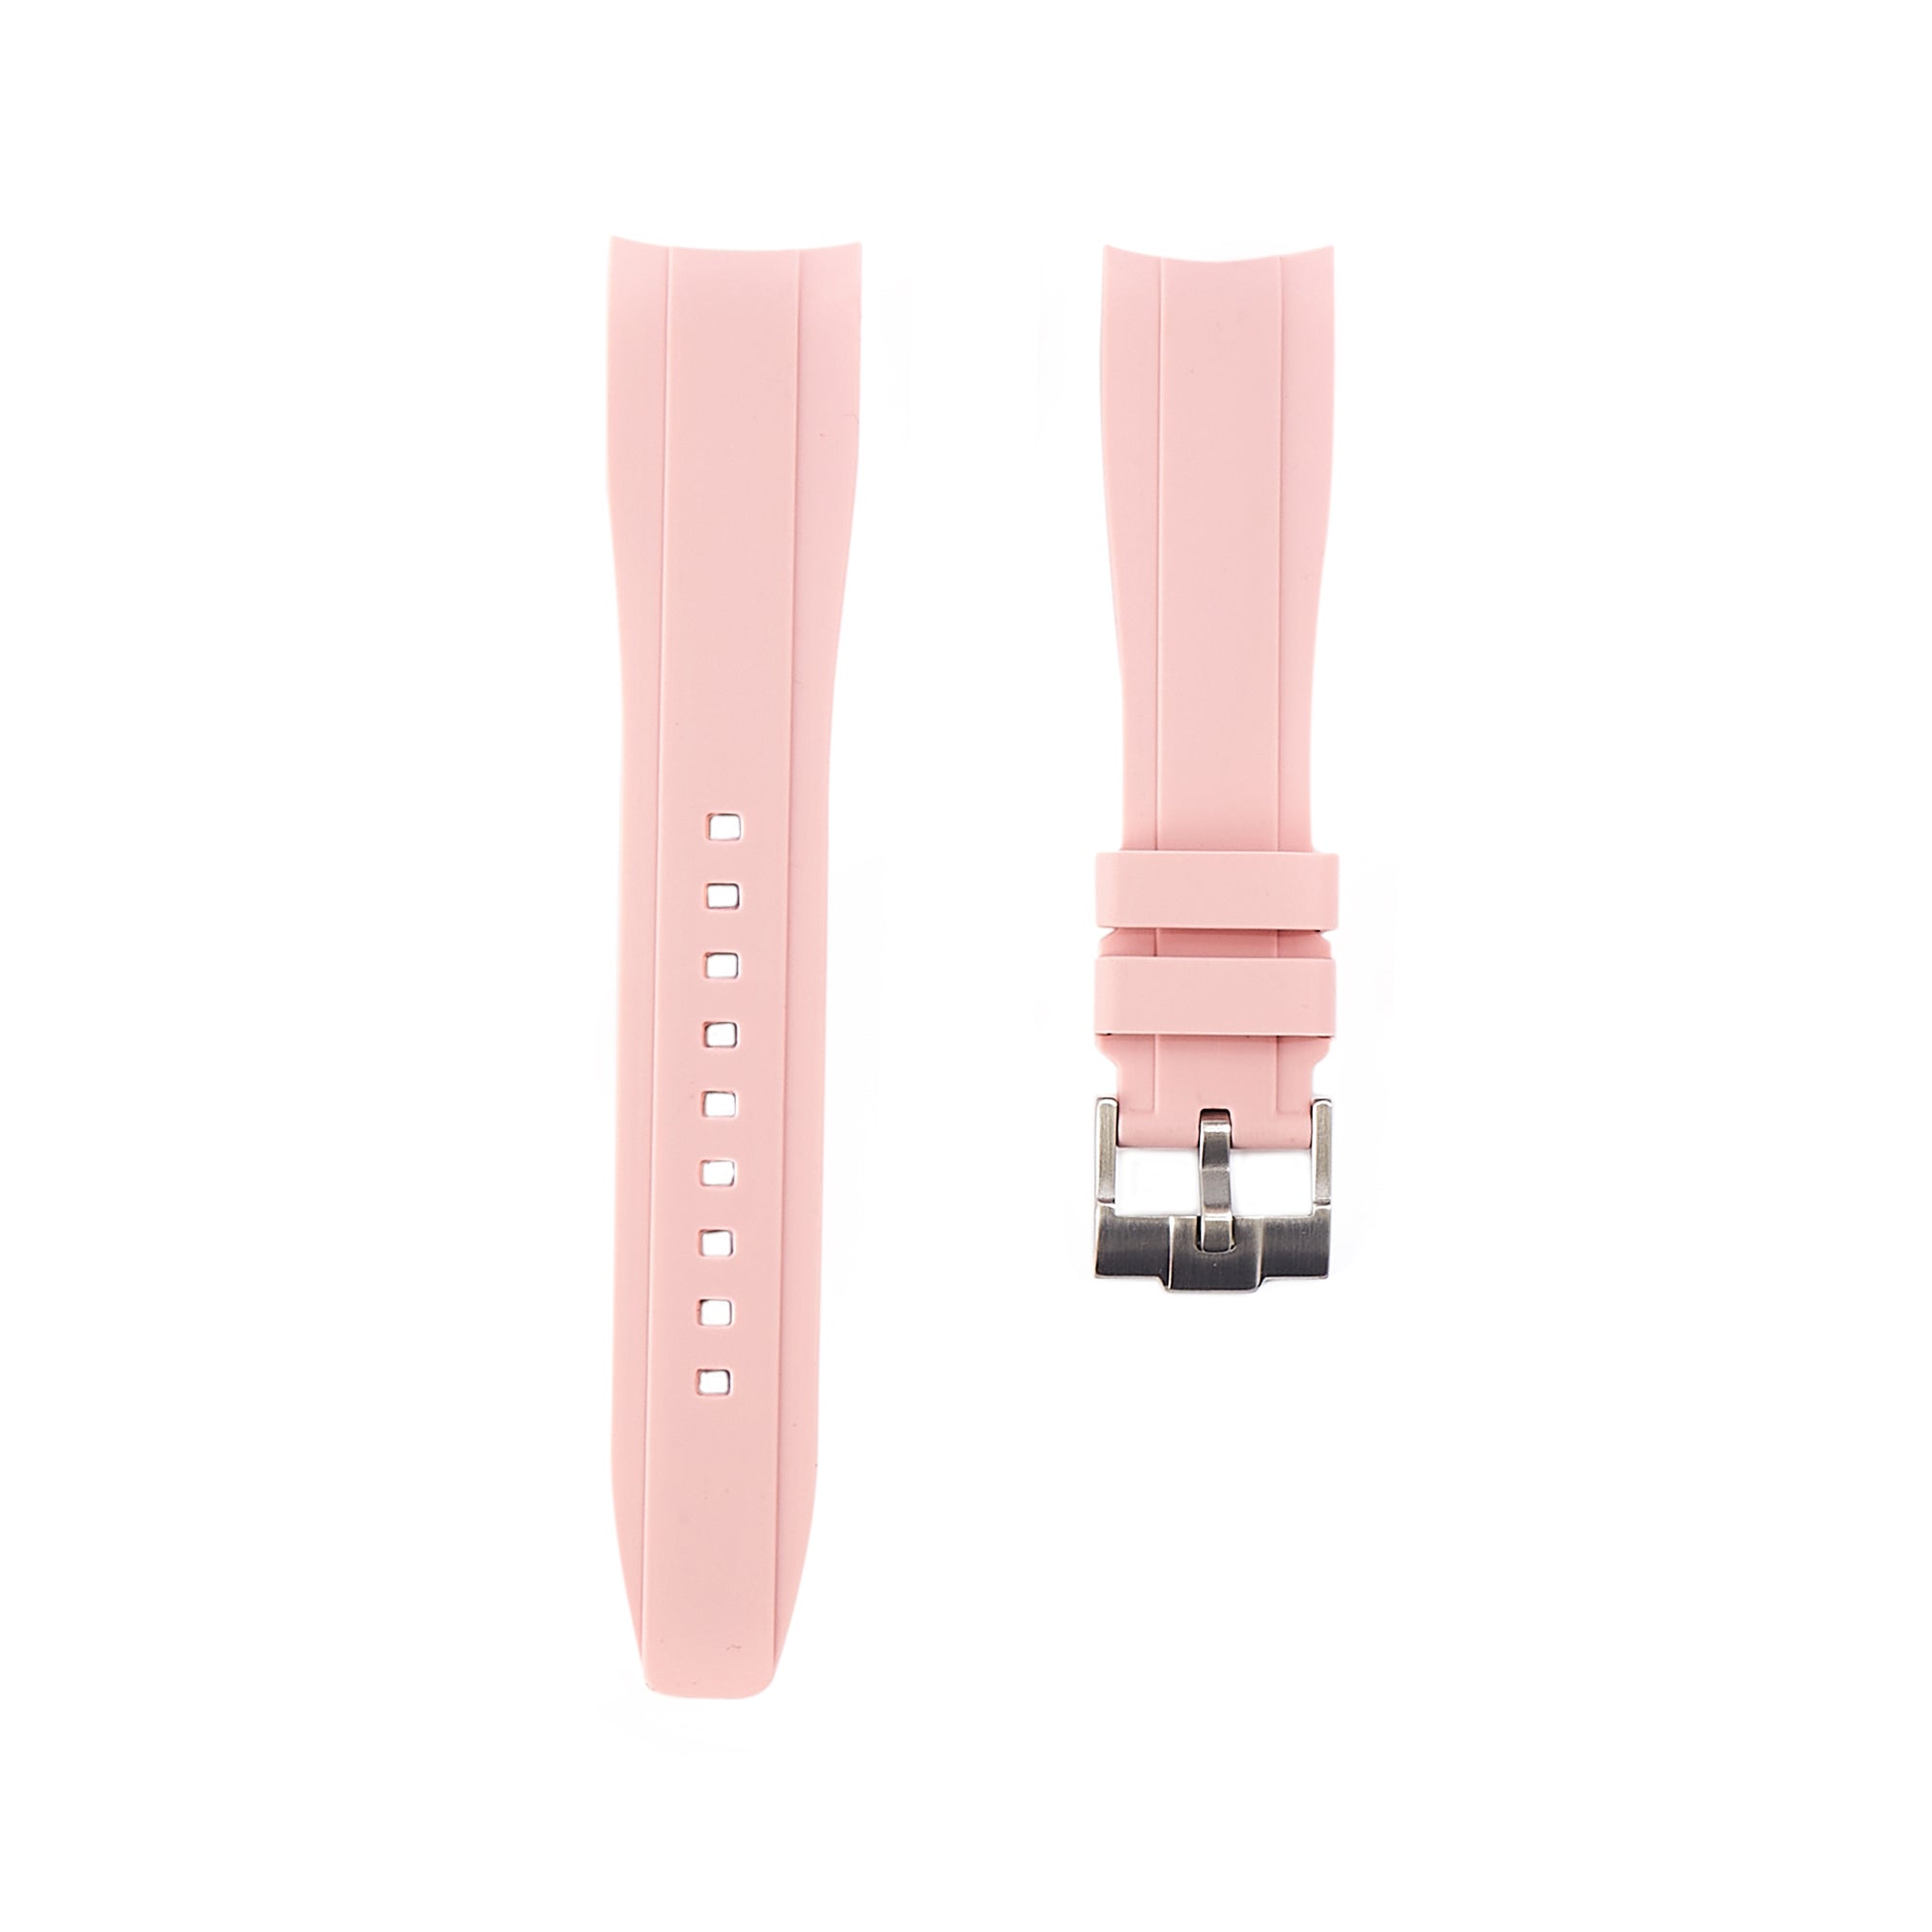 Curved End Soft Silicone Strap - Compatible with Seiko SRPD – Light Pink (2418) -StrapSeeker